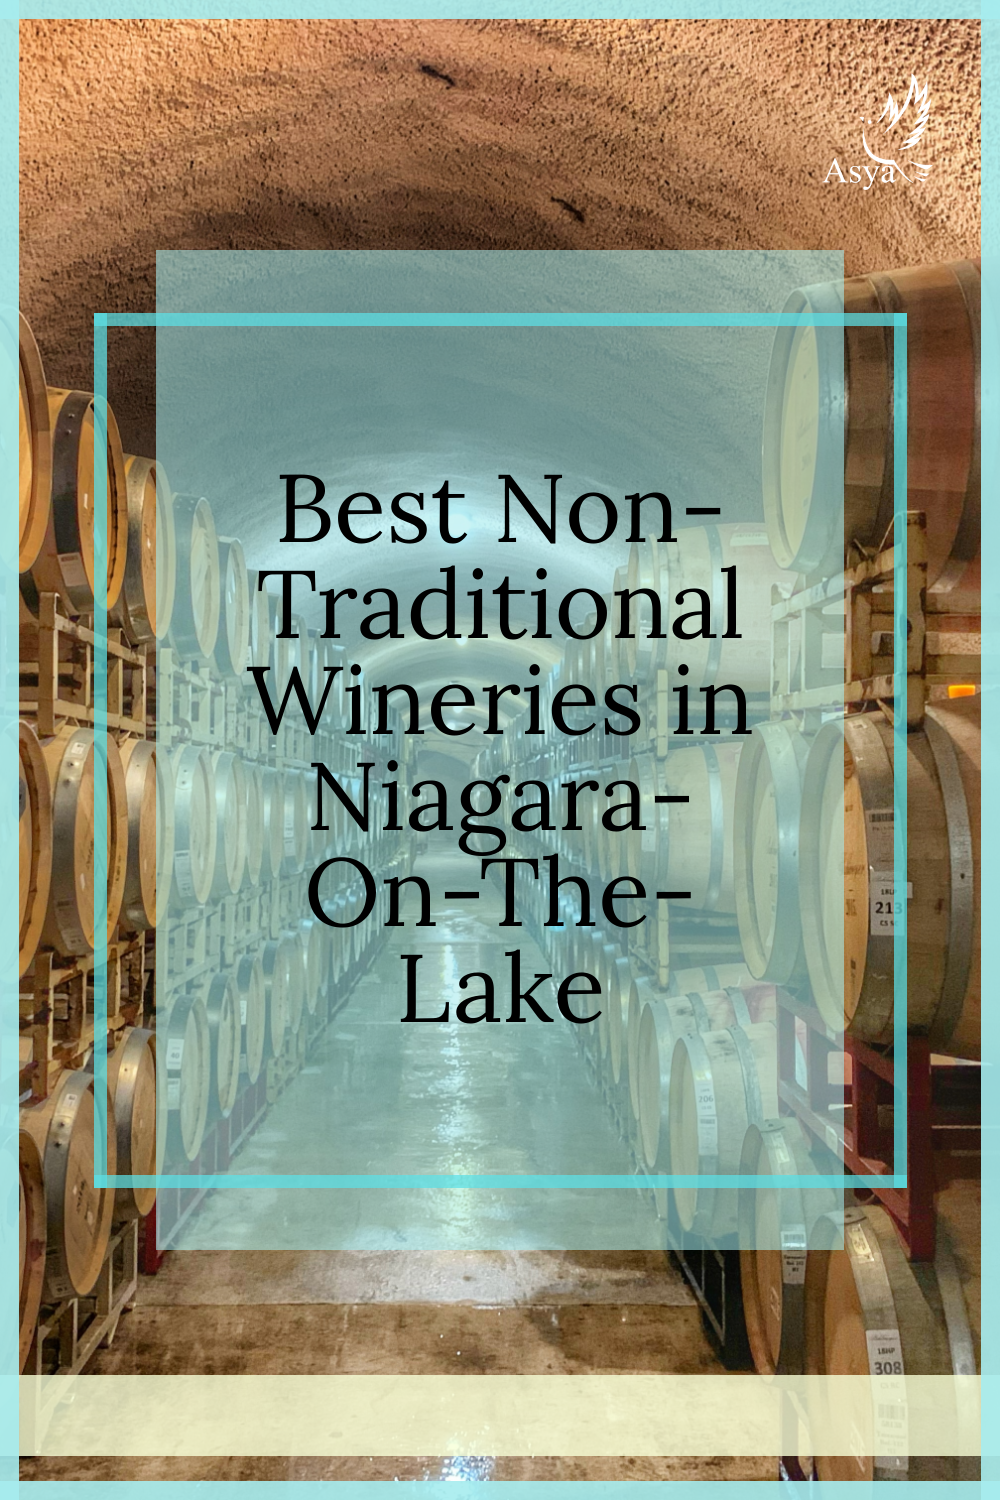 Best Non-Traditional Wineries in Niagara On The Lake.jpg